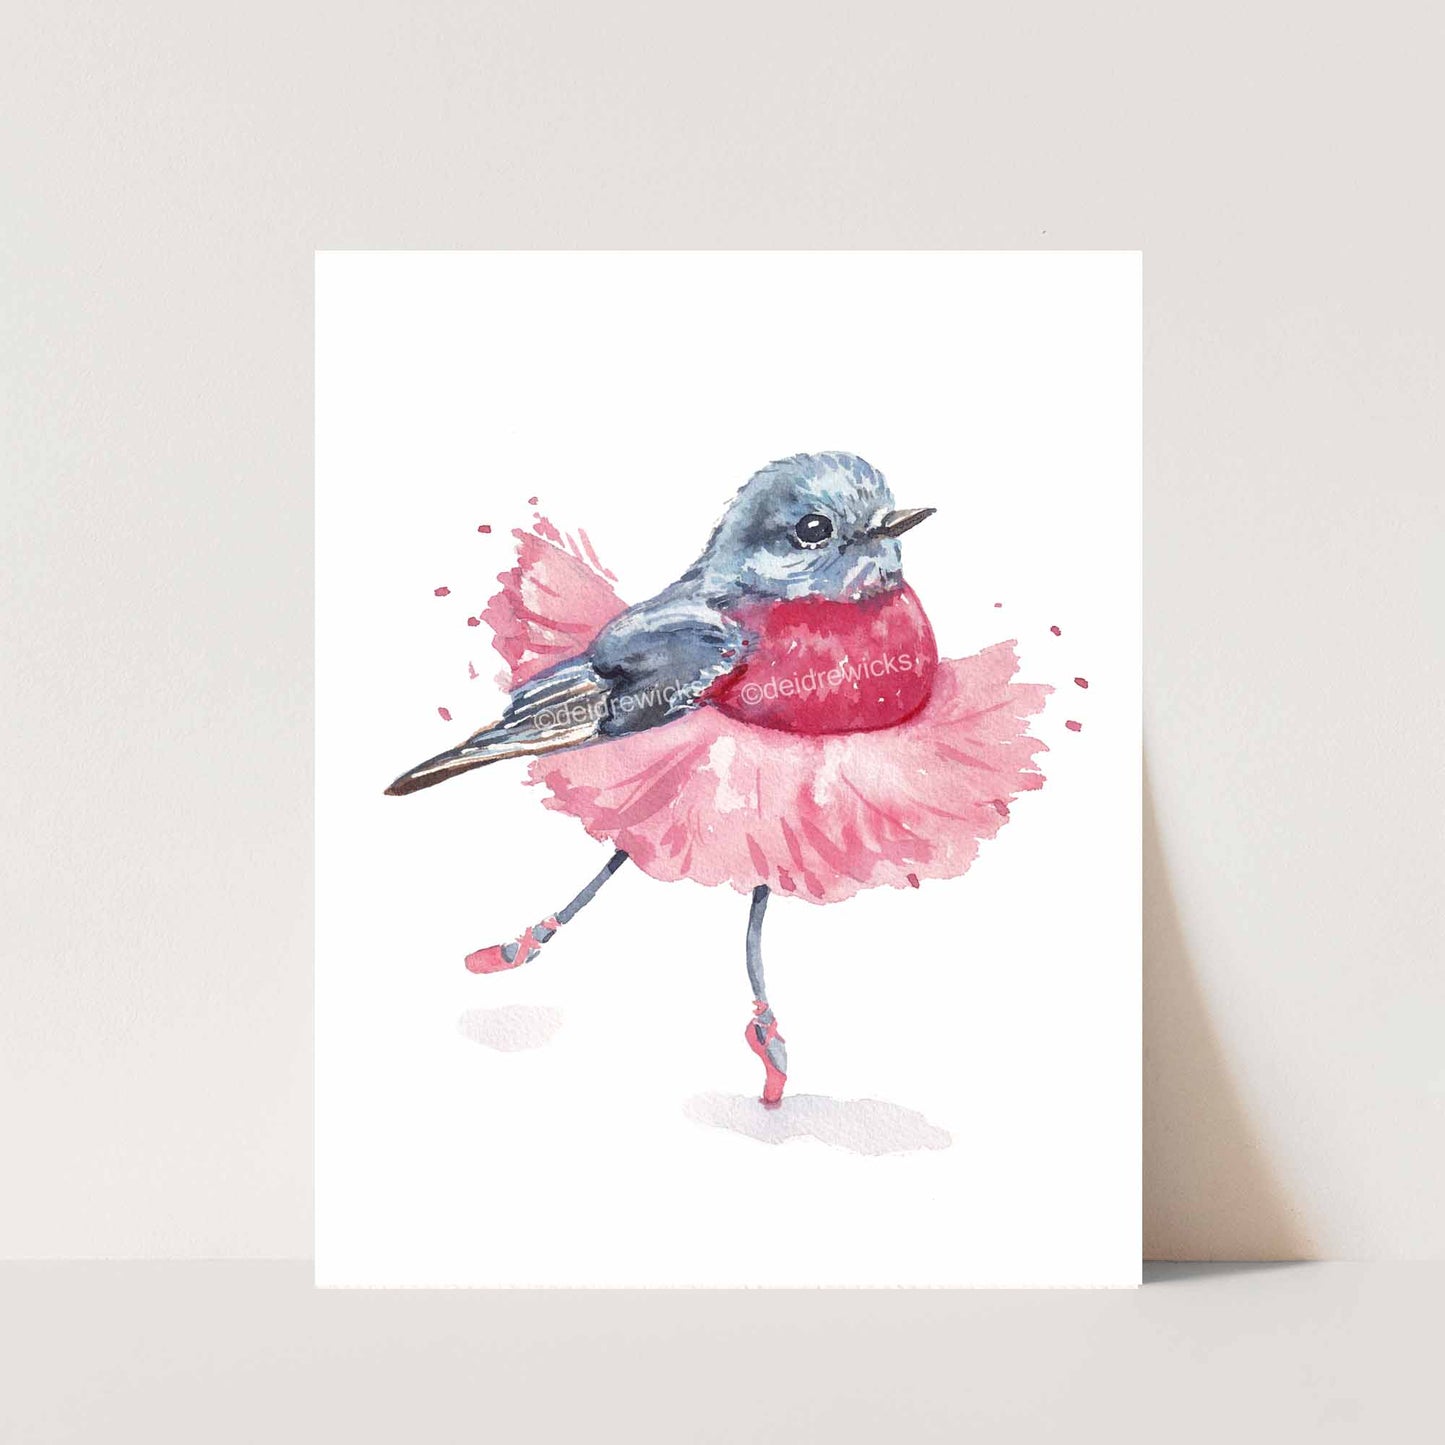 Ballet bird watercolour print of a rose robin wearing a pink tutu while dancing in pointe shoes. Art by Deidre Wicks